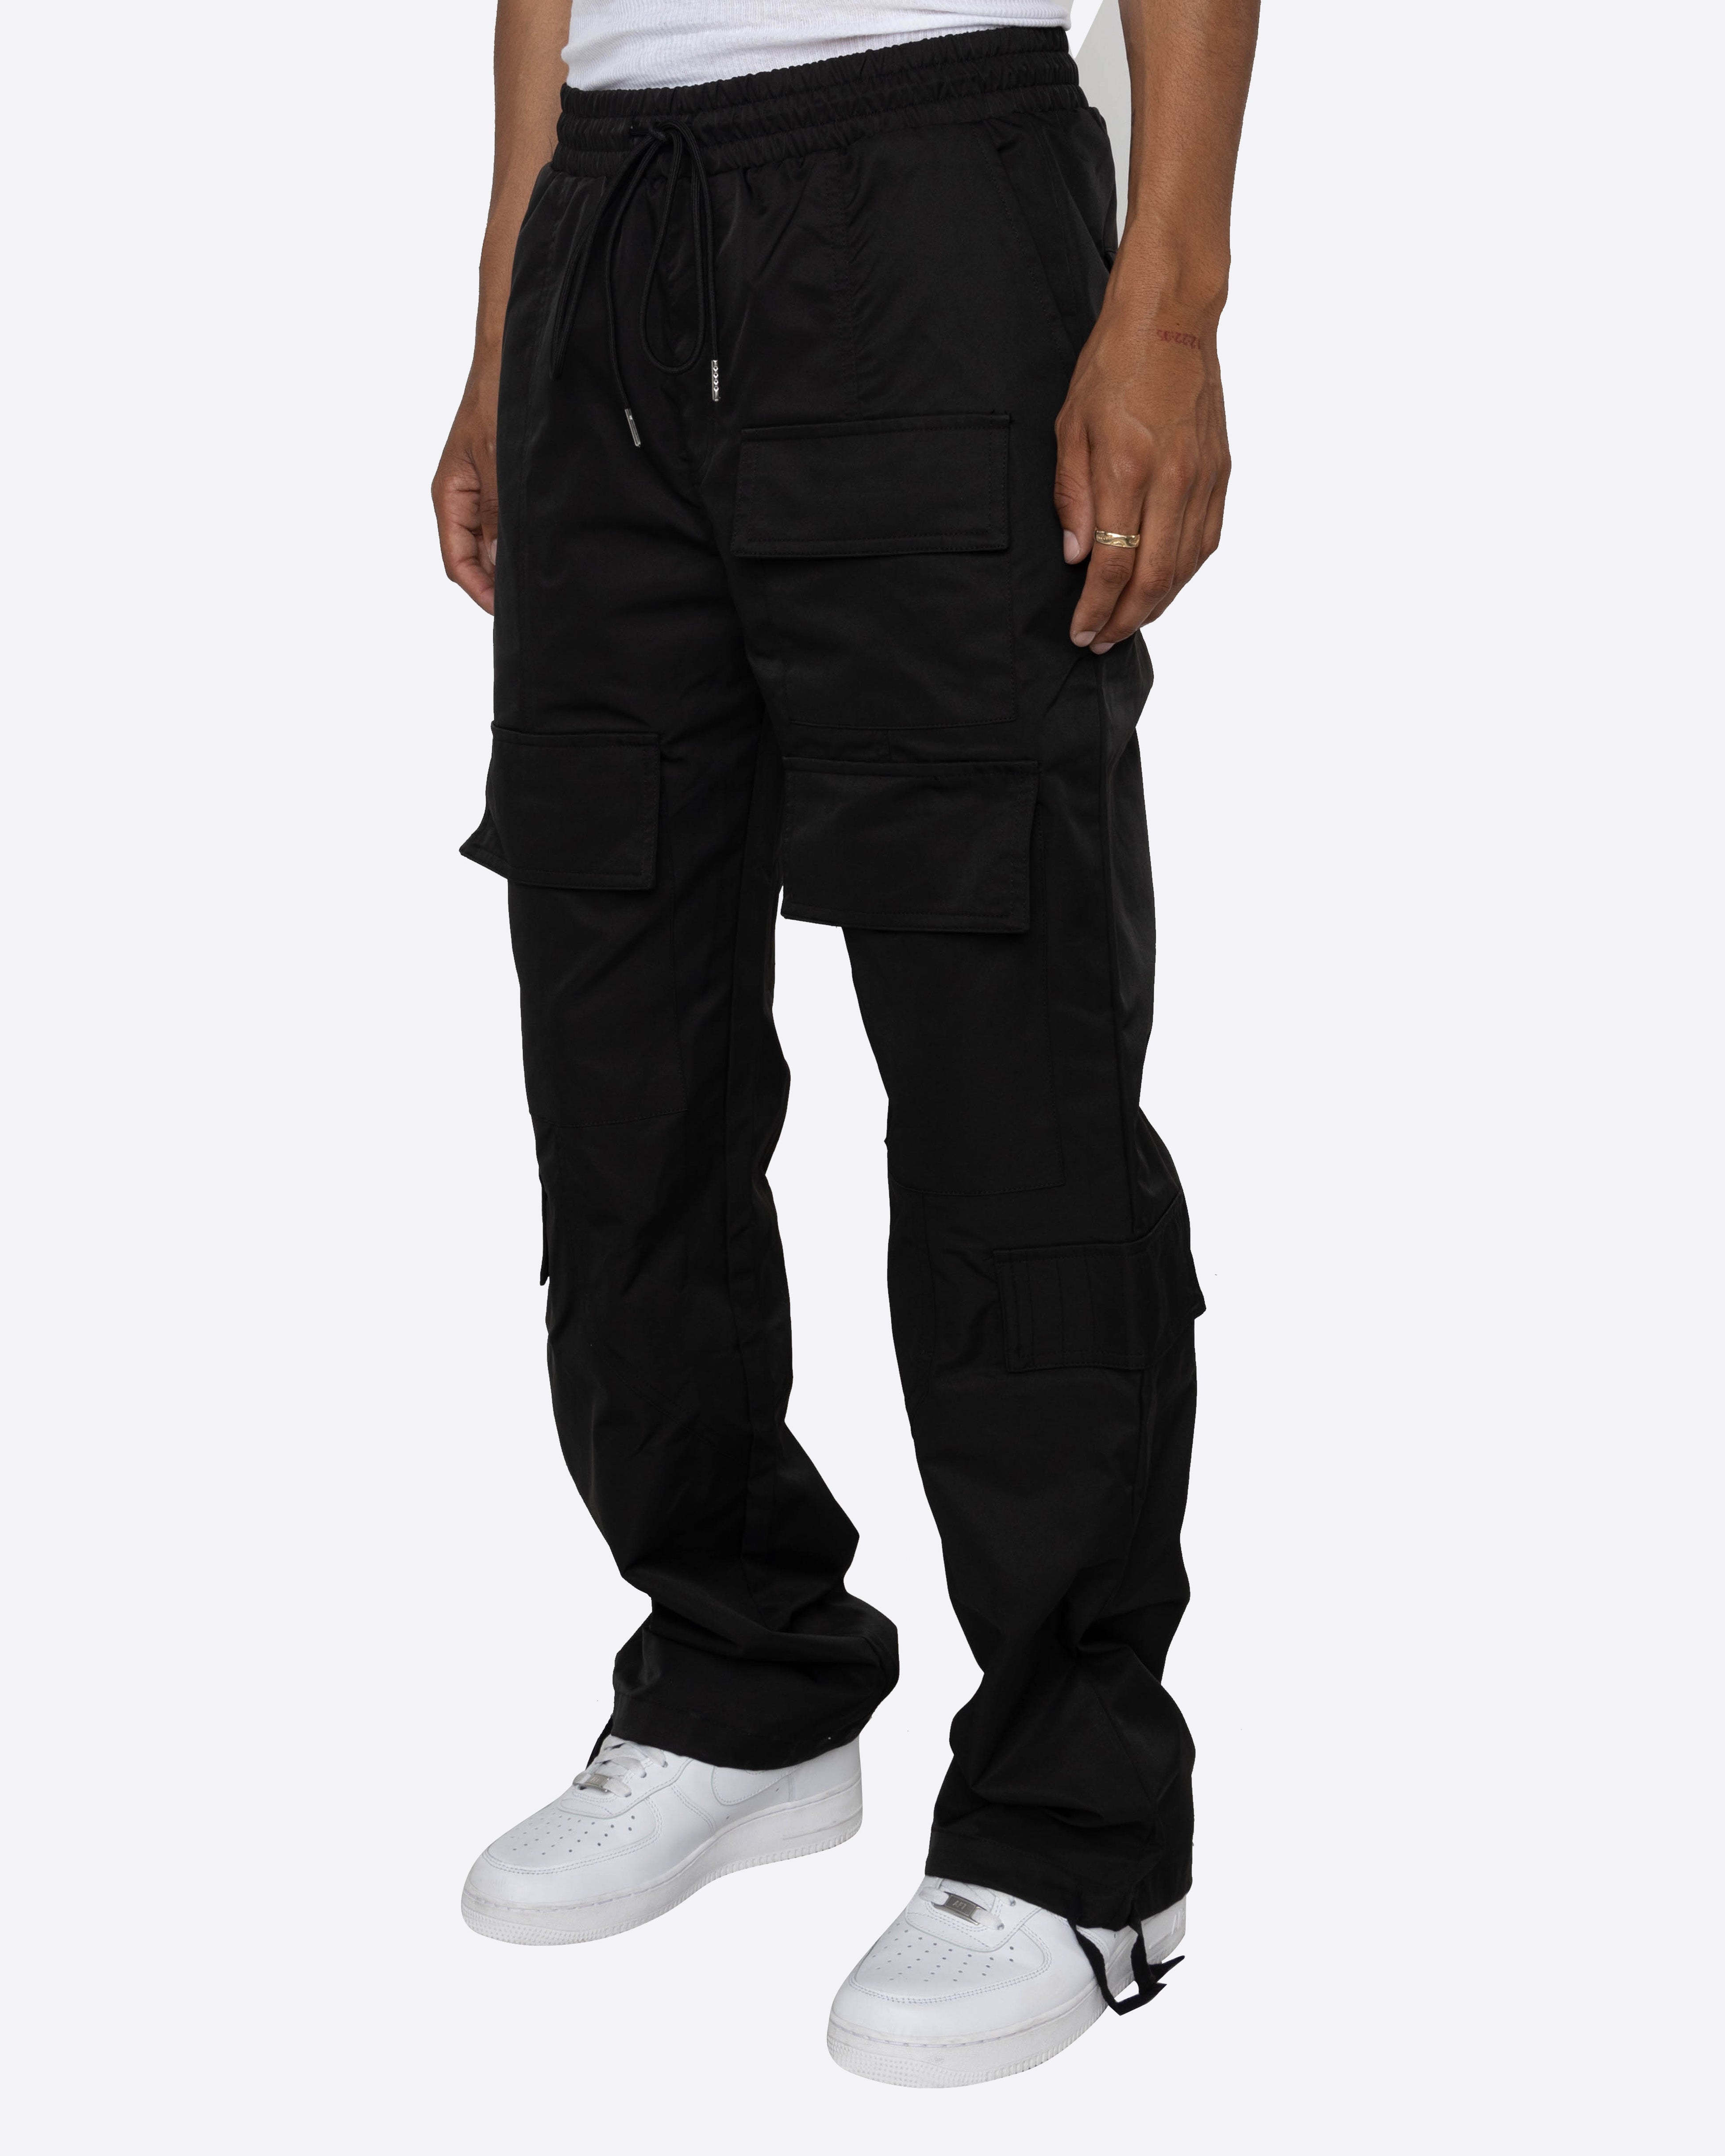 Ed Hardy UO Exclusive Grey Cloud Fitted Cargo Pants | Urban Outfitters UK